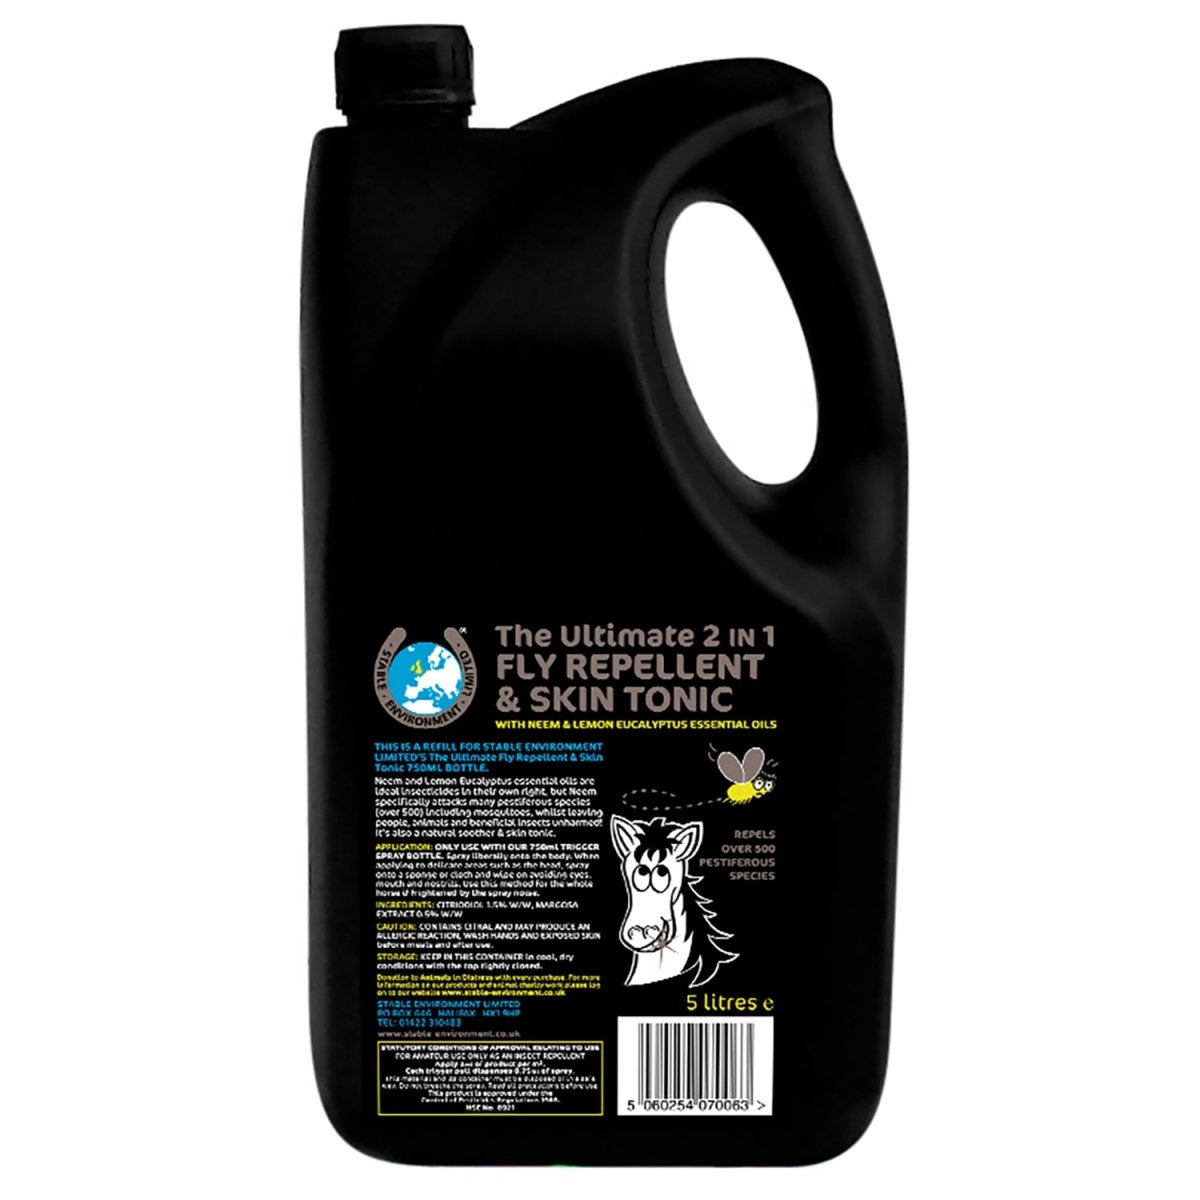 The Ultimate 2 In 1 Fly Repellent & Skin Tonic - 5Lt -